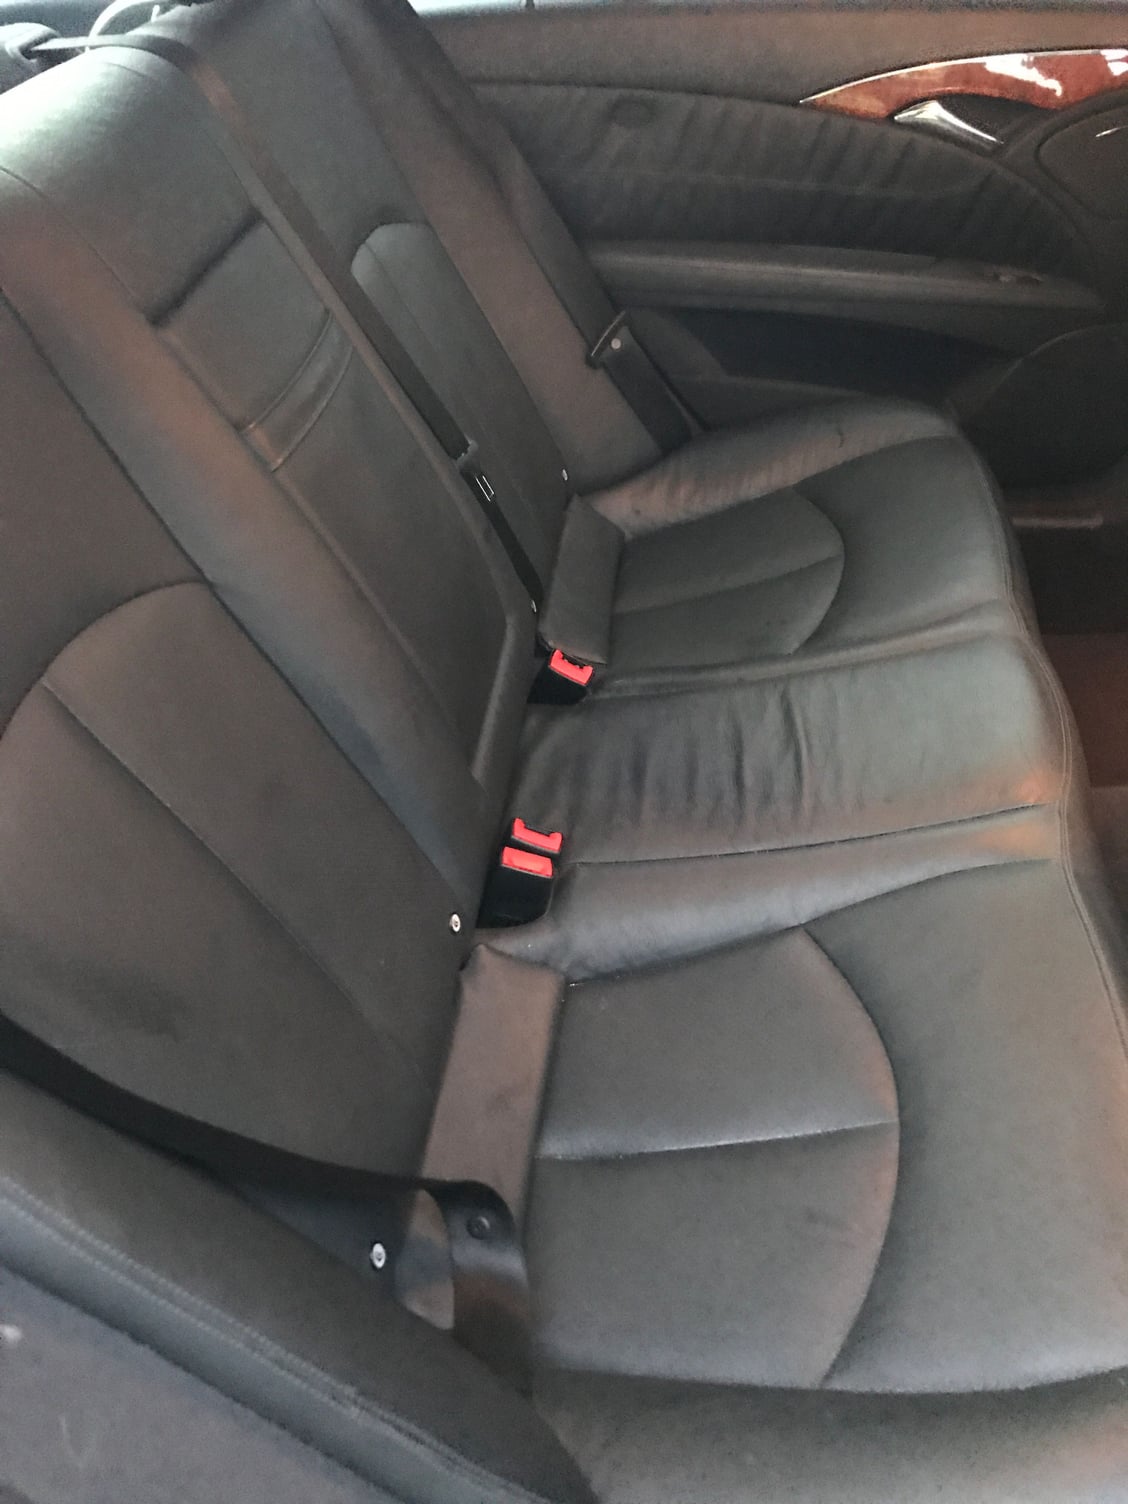 Parting Out W211 Interior Parts Mbworld Org Forums